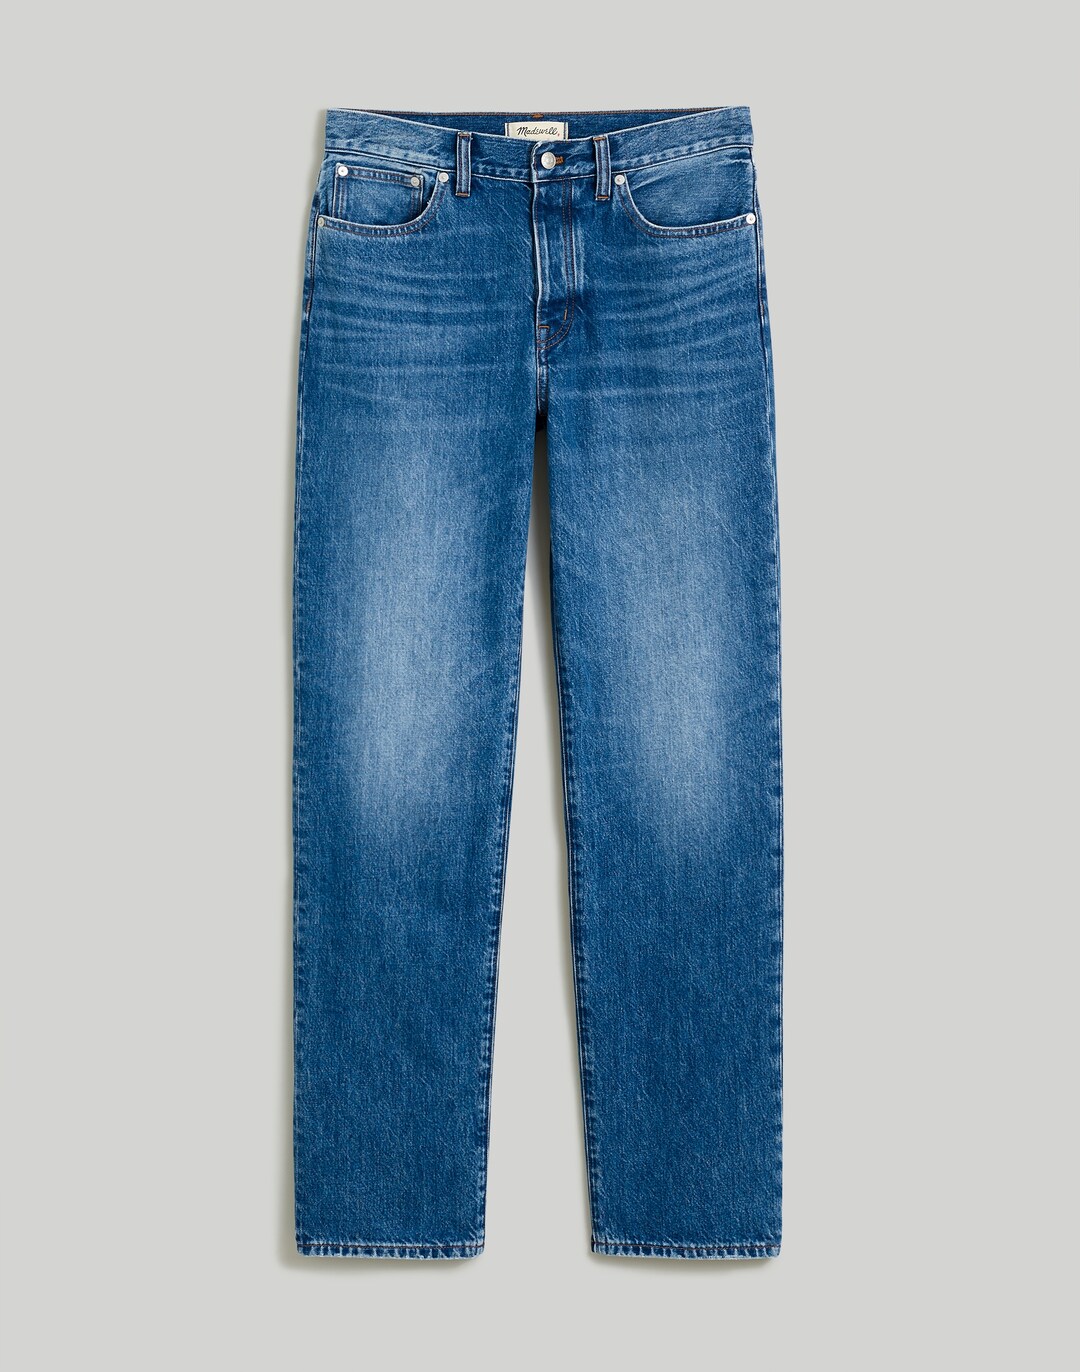 Petite Low-Slung Straight Jeans in Palmina Wash: Airy Denim Edition